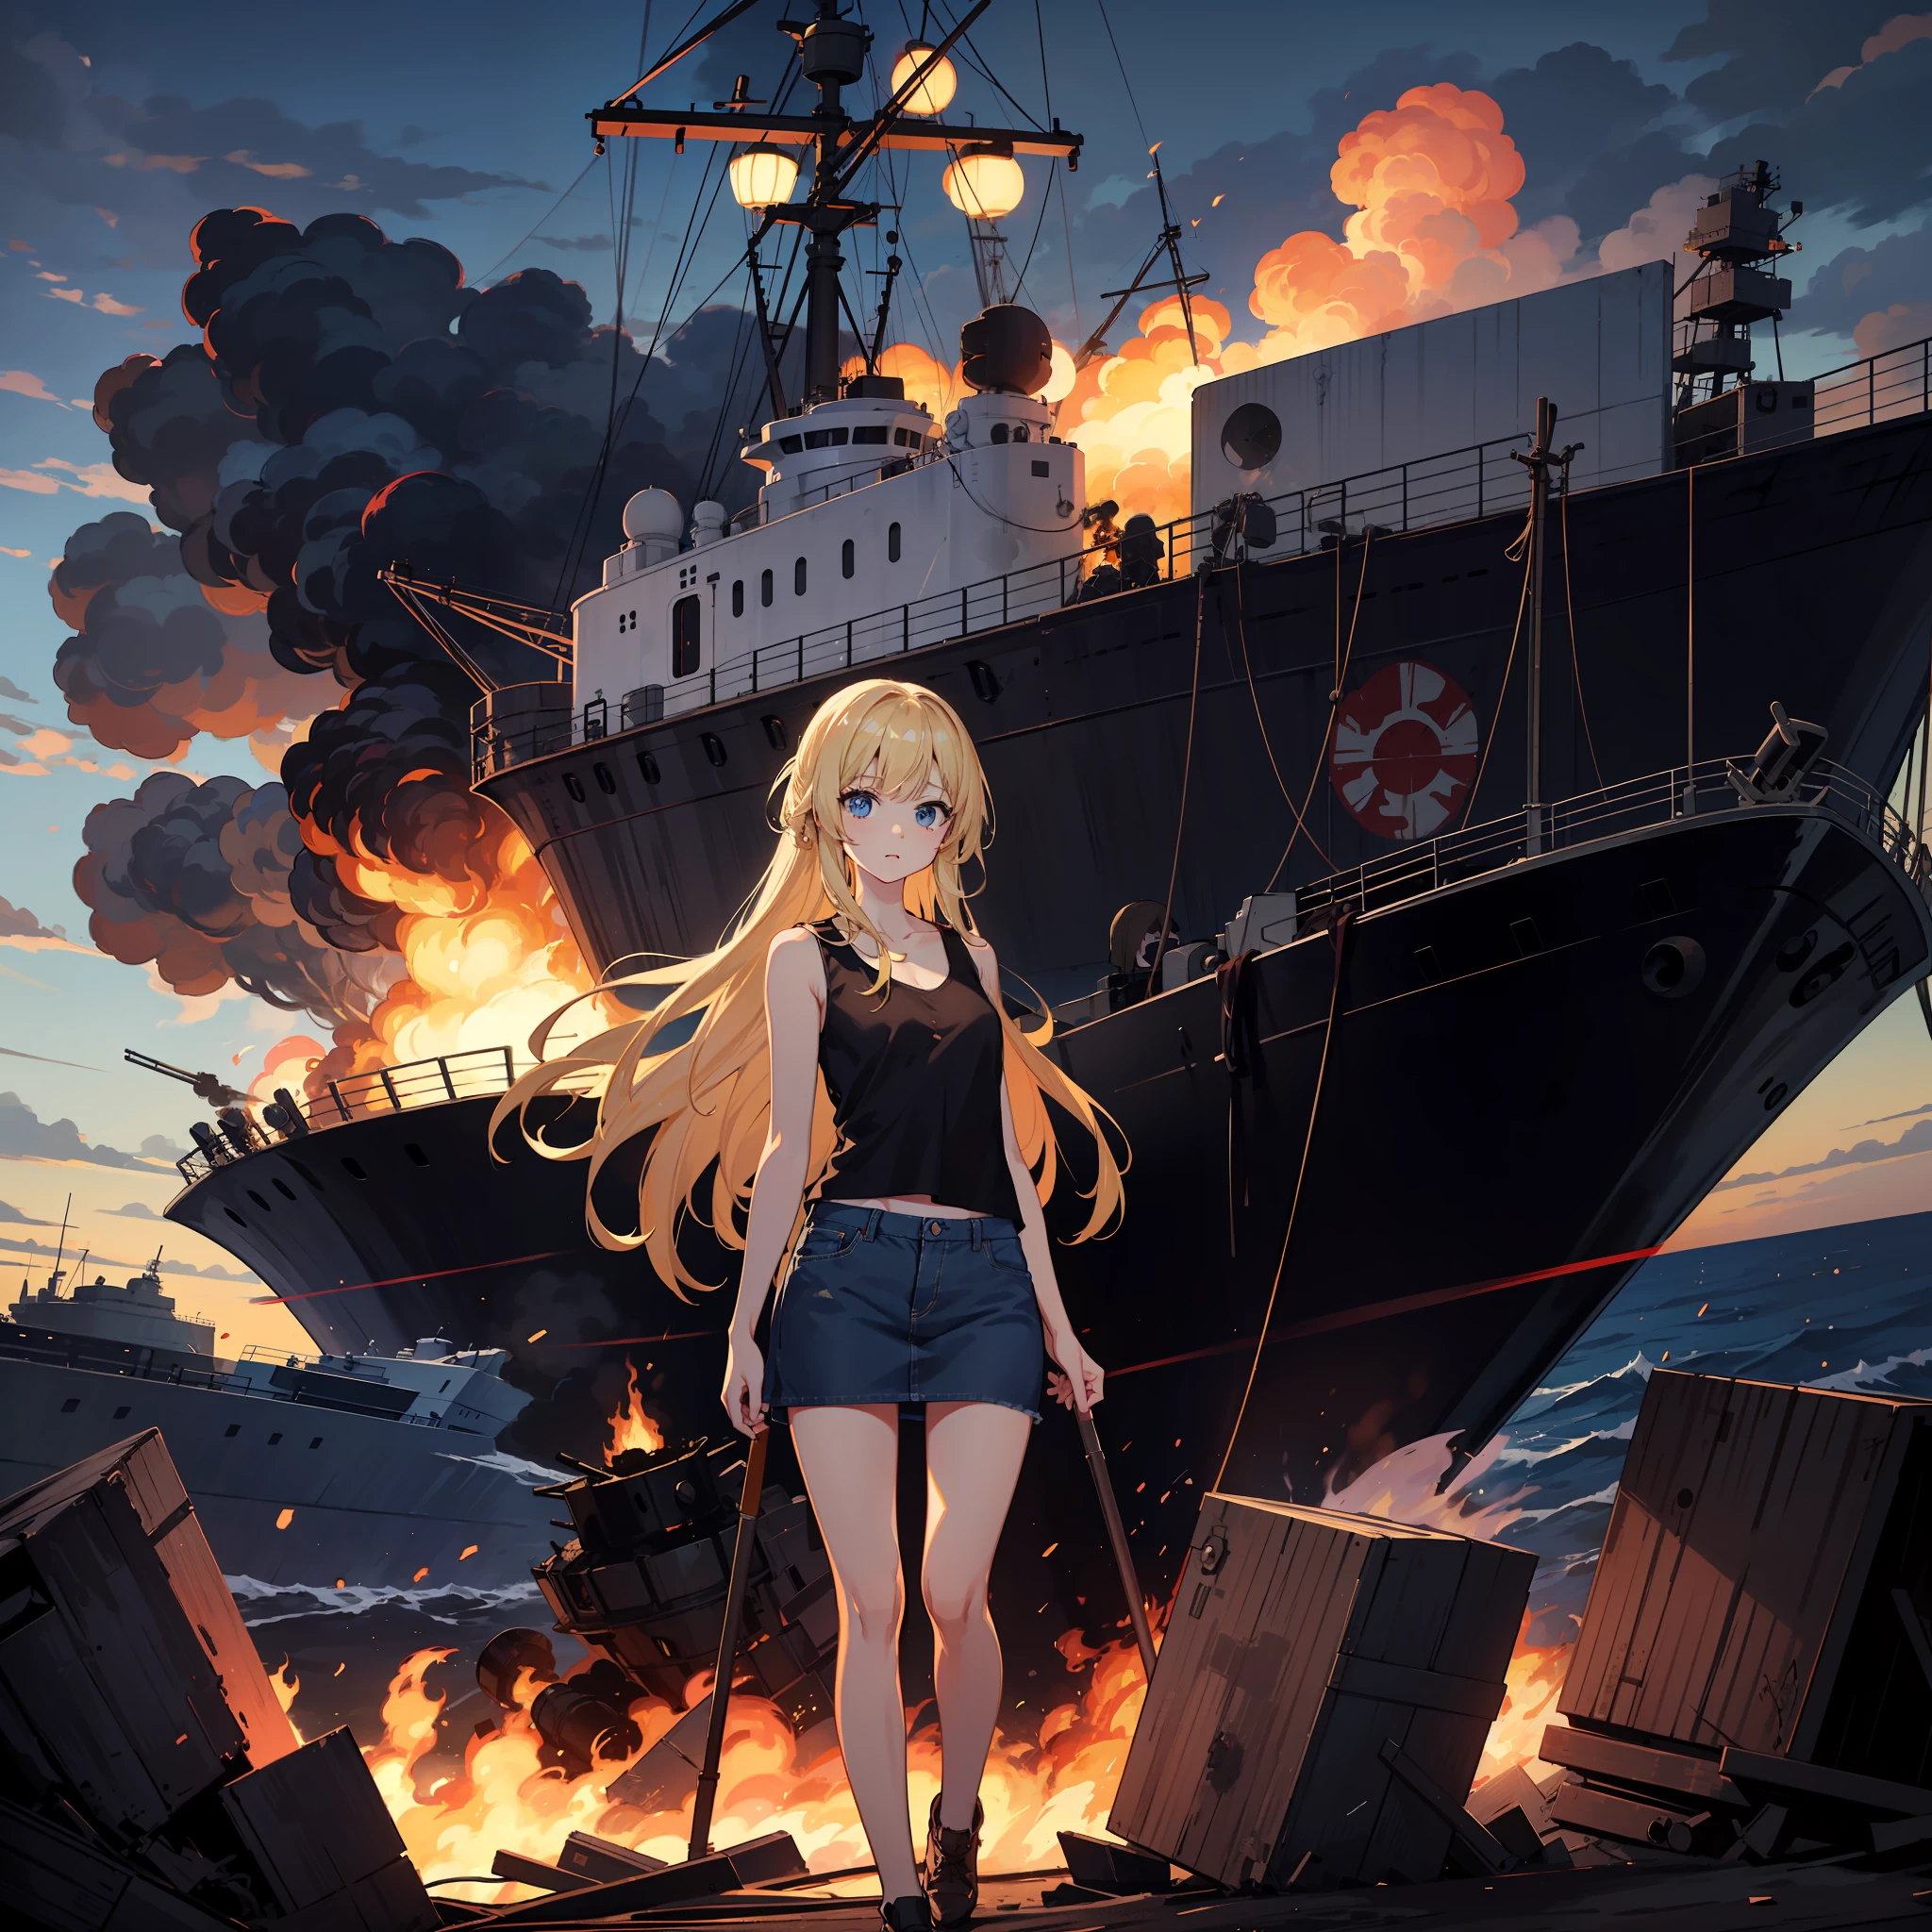 ​masterpiece, Top image quality, hight resolution, Beautiful blonde girl、女の子1人、Whole human body、Blue eyes、deadpan、Black tank top、jean skirt、semi long hair、is standing、showing butt、Shot a bazooka、by night、Naval port blown up in flames、Building in flames、Ship blasted into flames